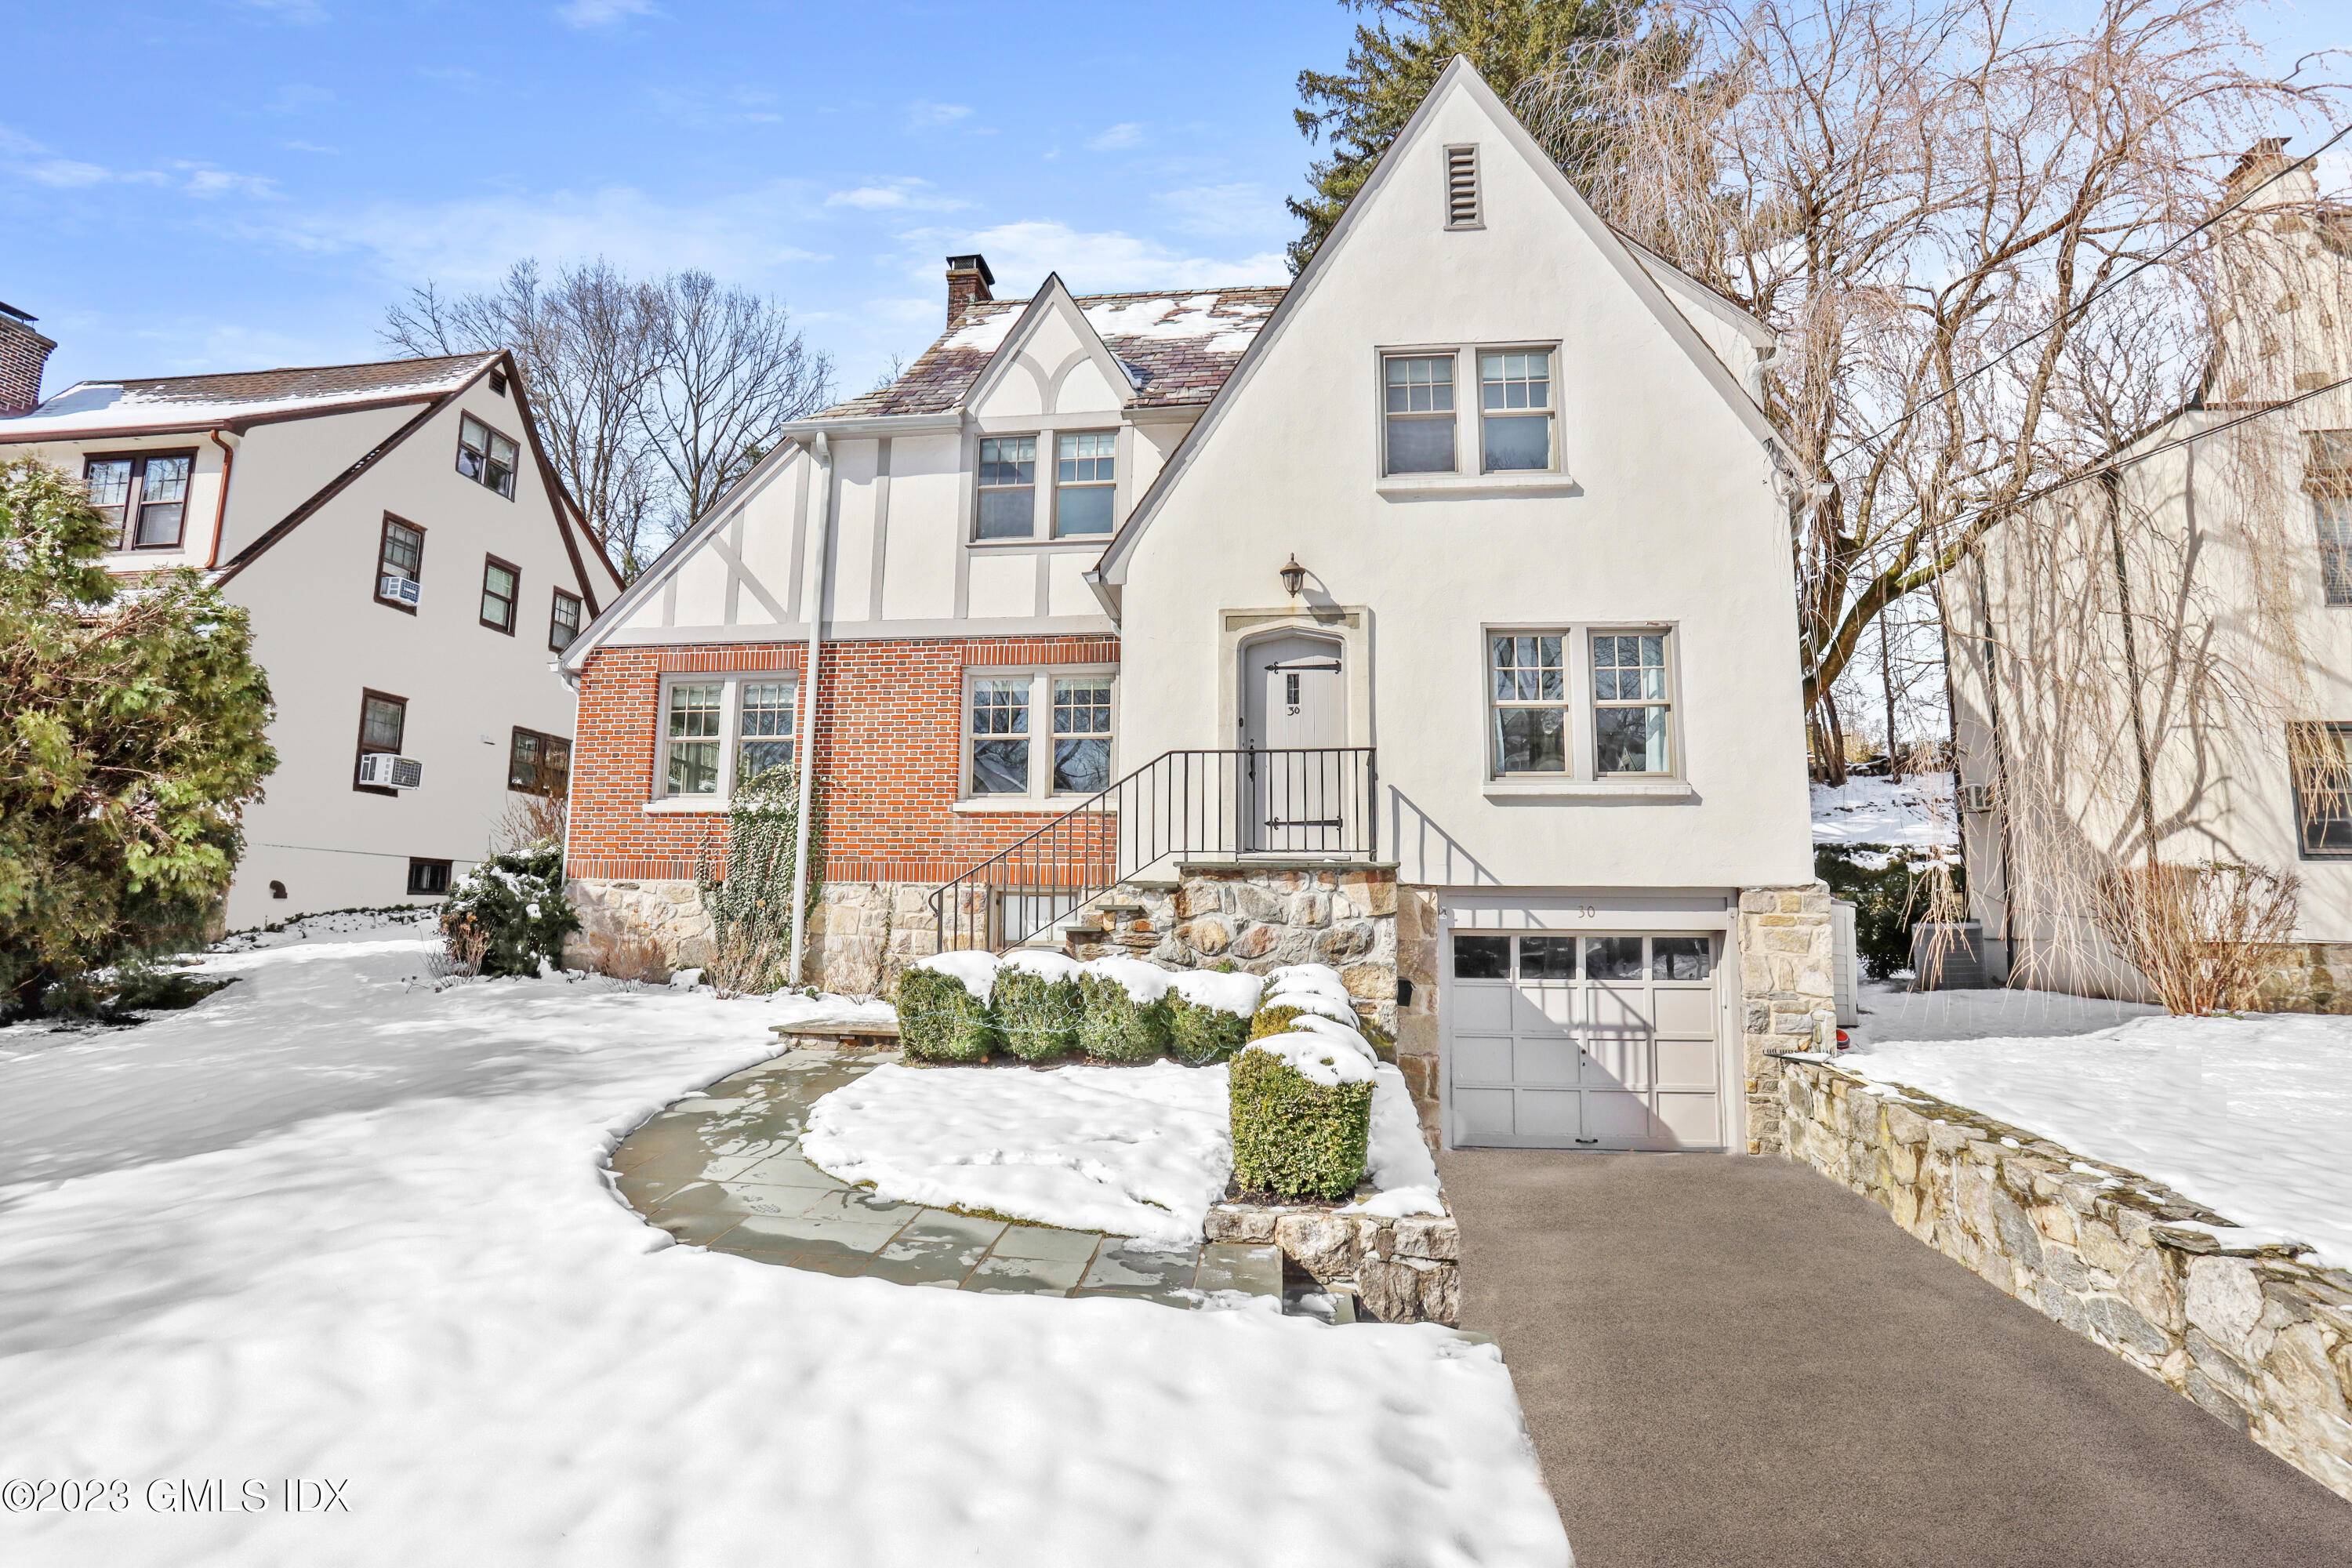 Perched high on a coveted Cos Cob street minutes from town, amenities, schools and the train, 30 Valleywood is a sun filled, tastefully renovated 3 4 bedroom single family home ...